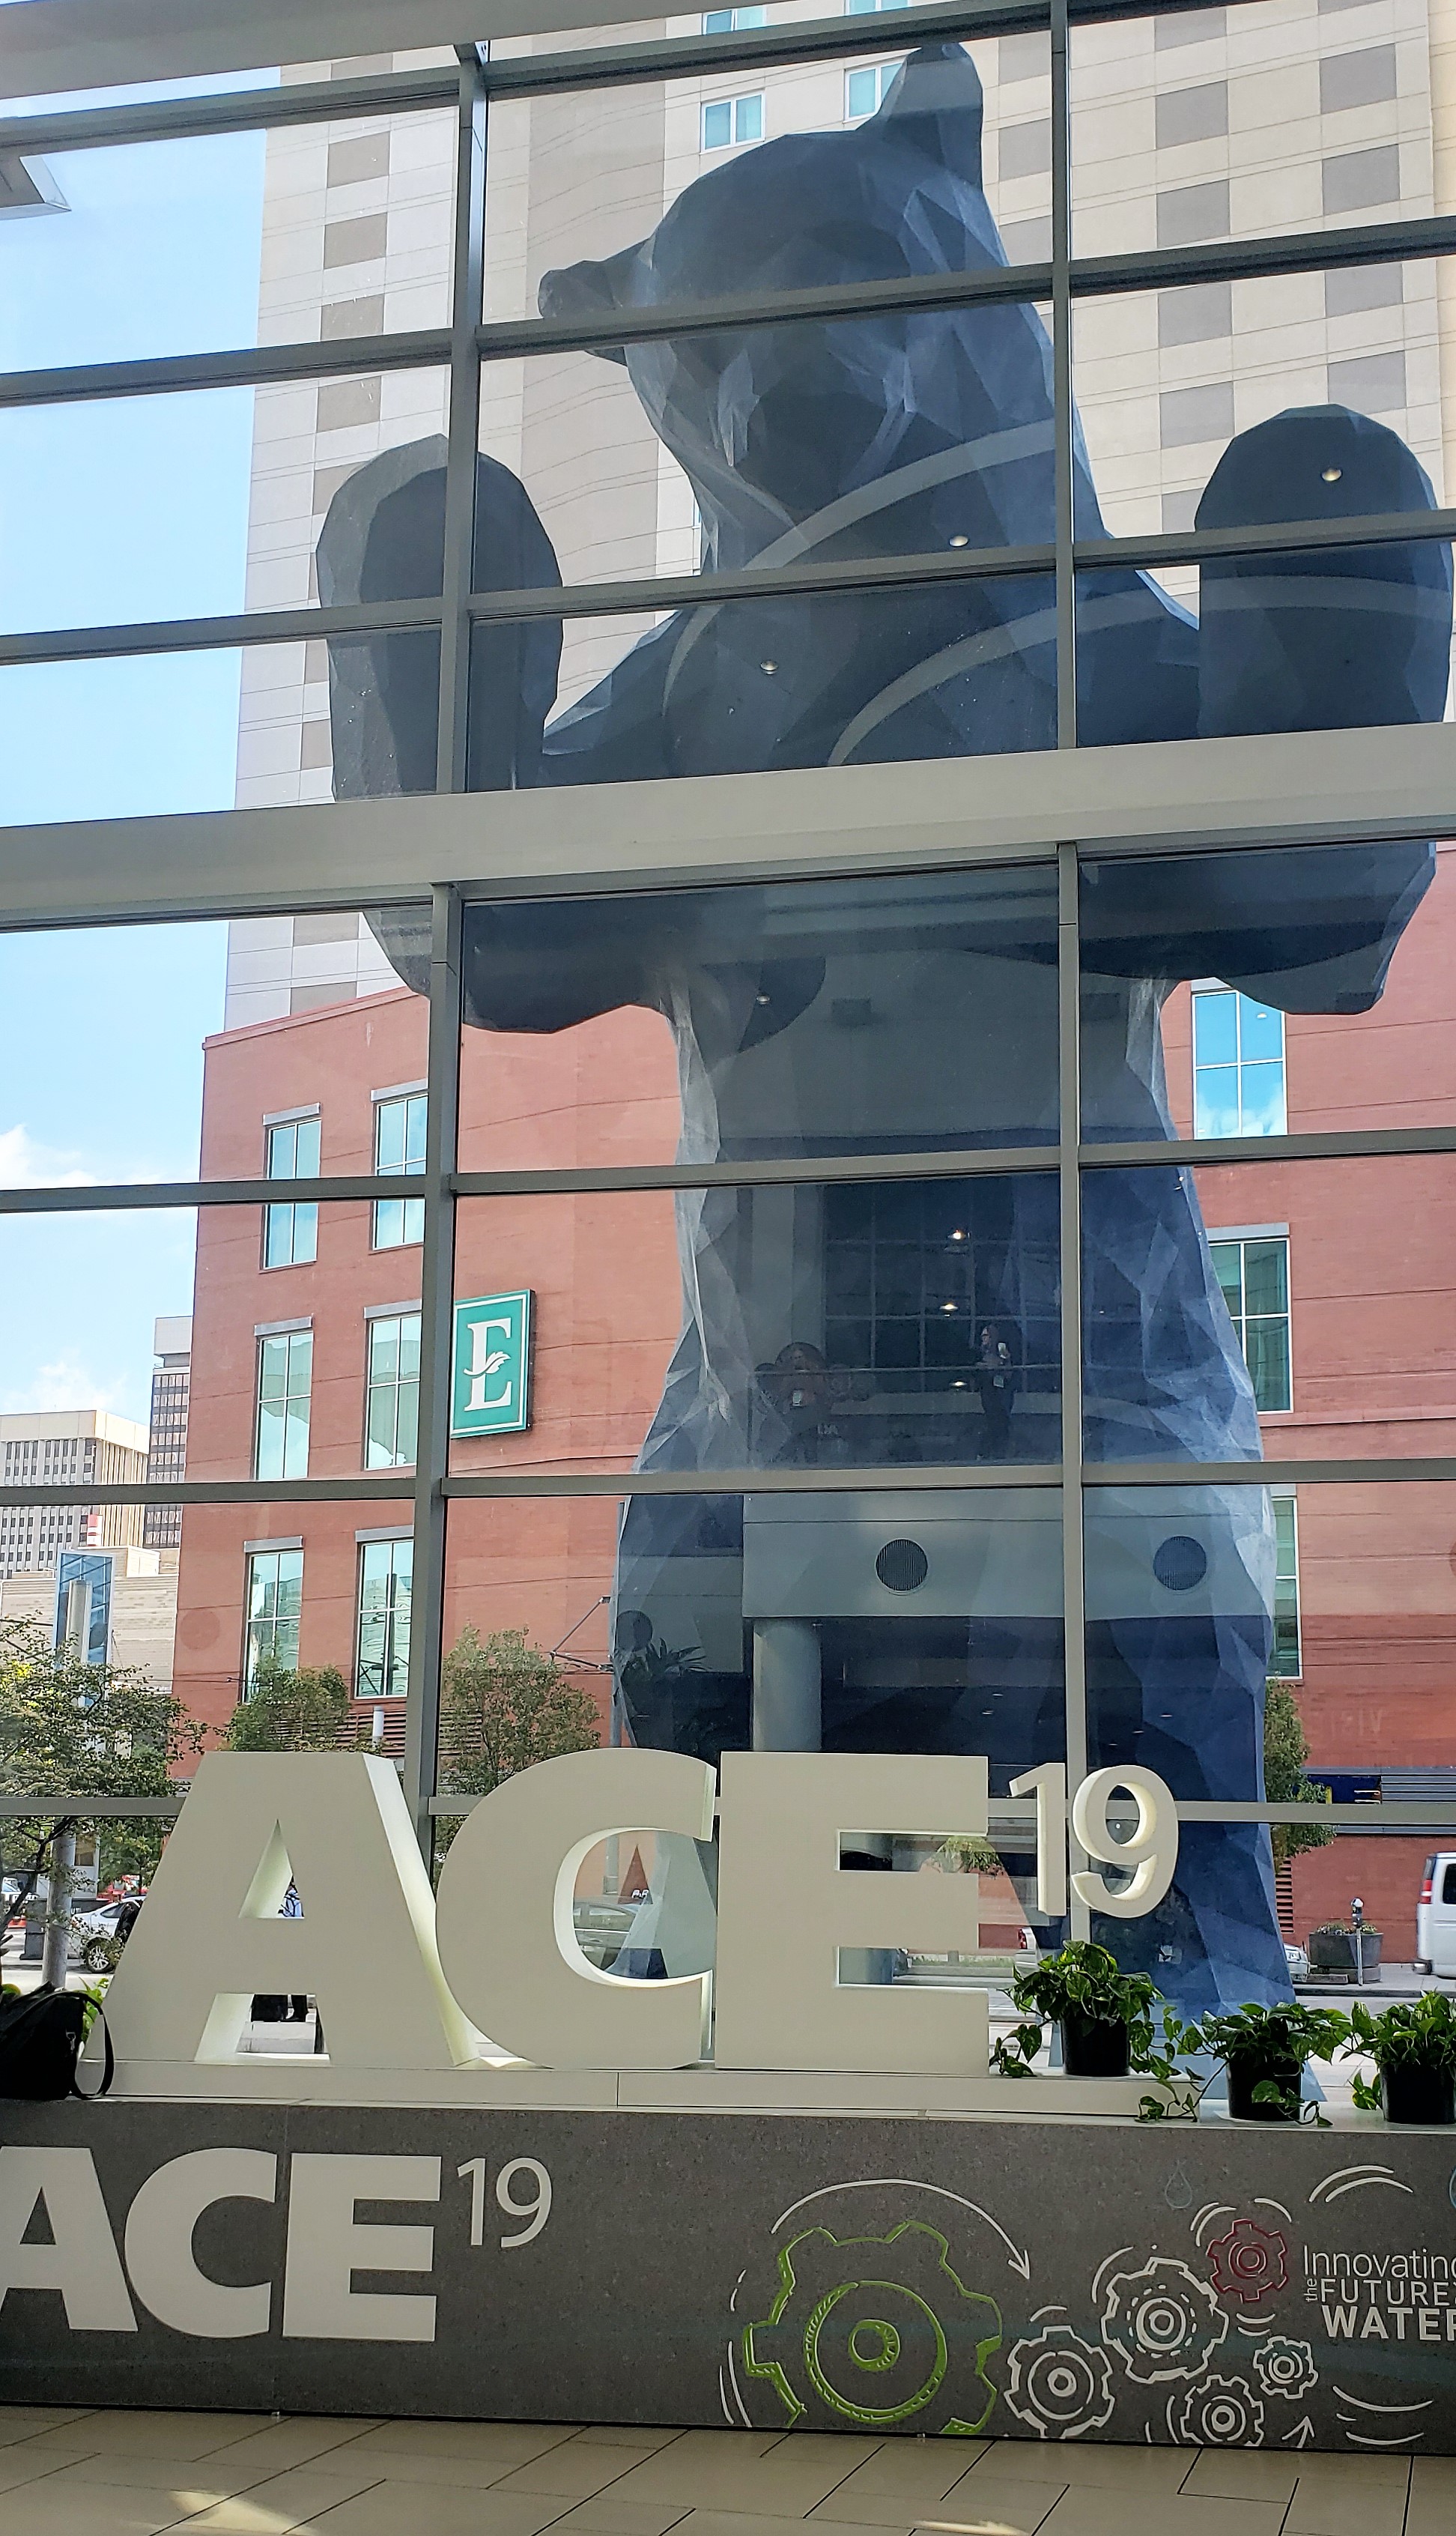 The city of Denver's iconic blue bear statue peers through the glass of the Colorado Convention Center at an information table set up for ACE19.